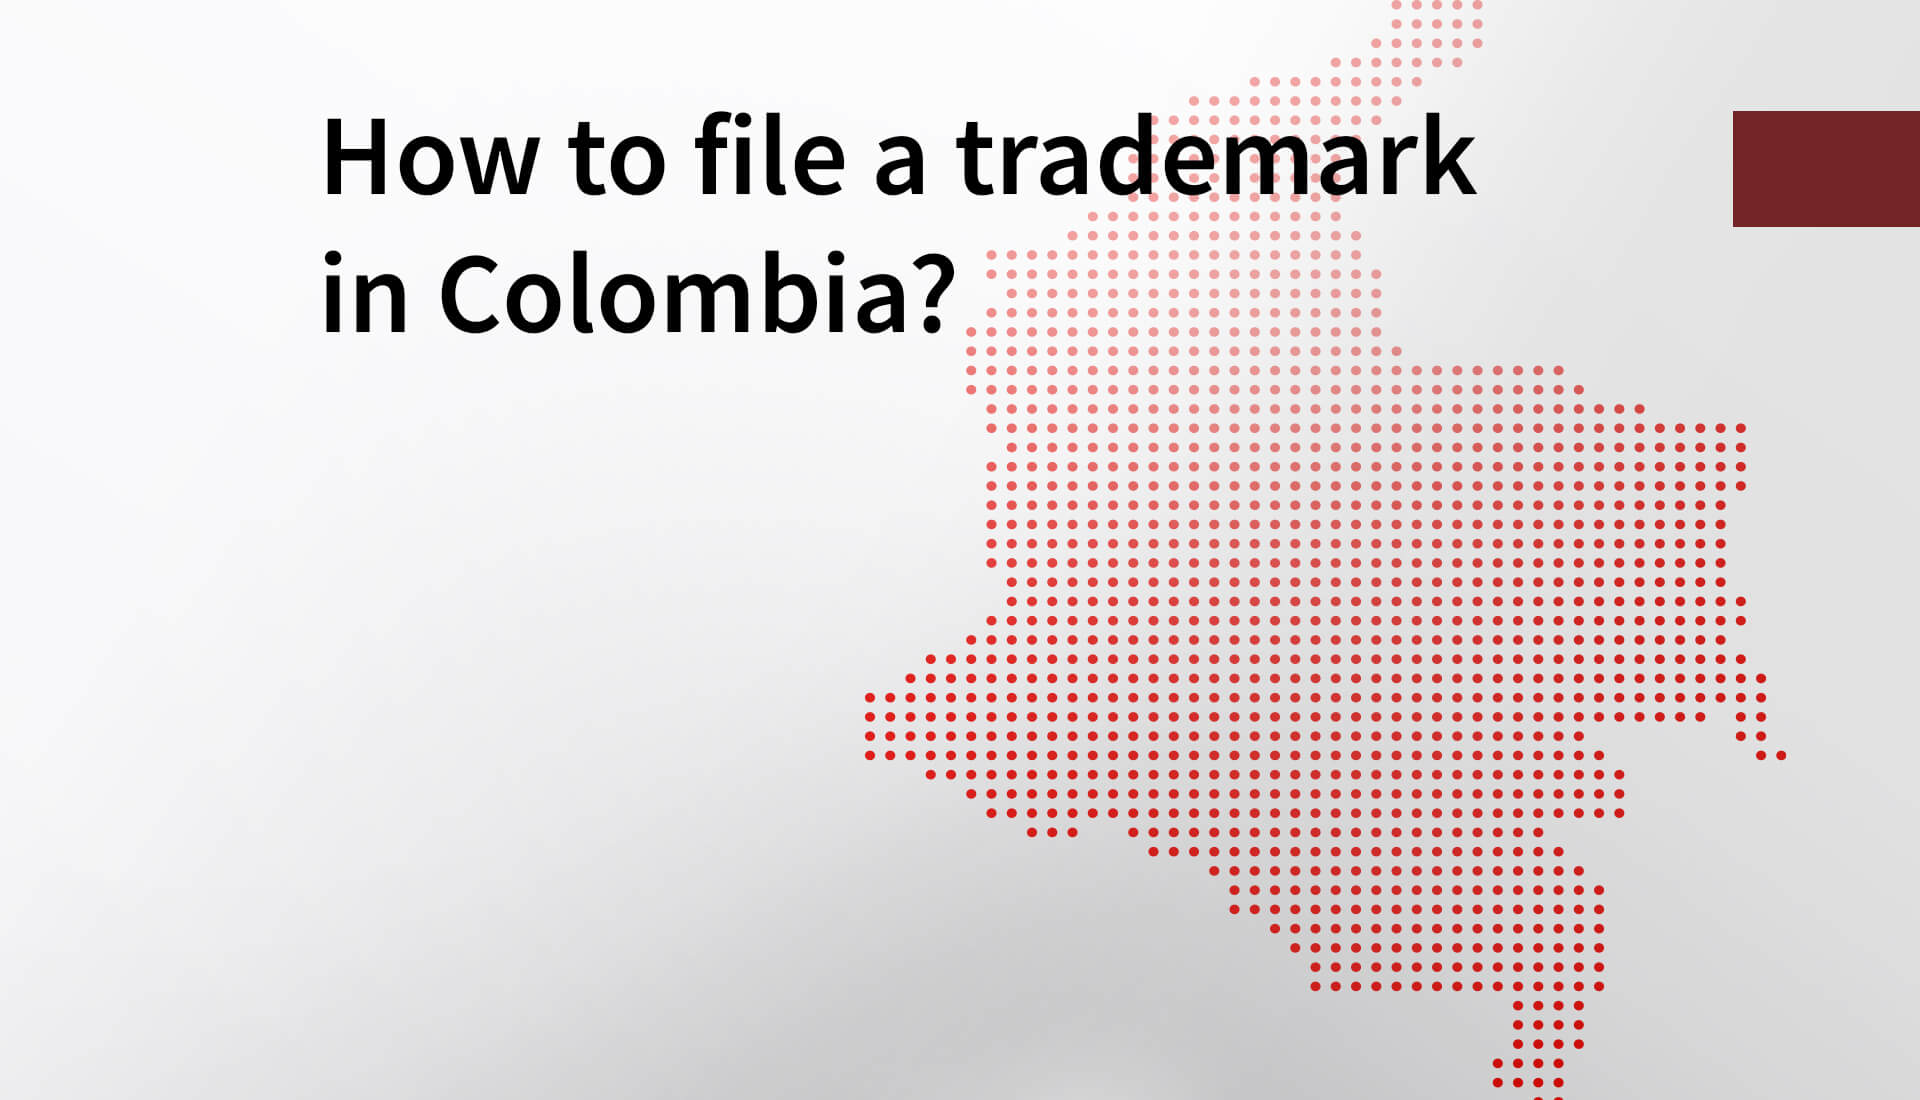 file a trademark in colombia